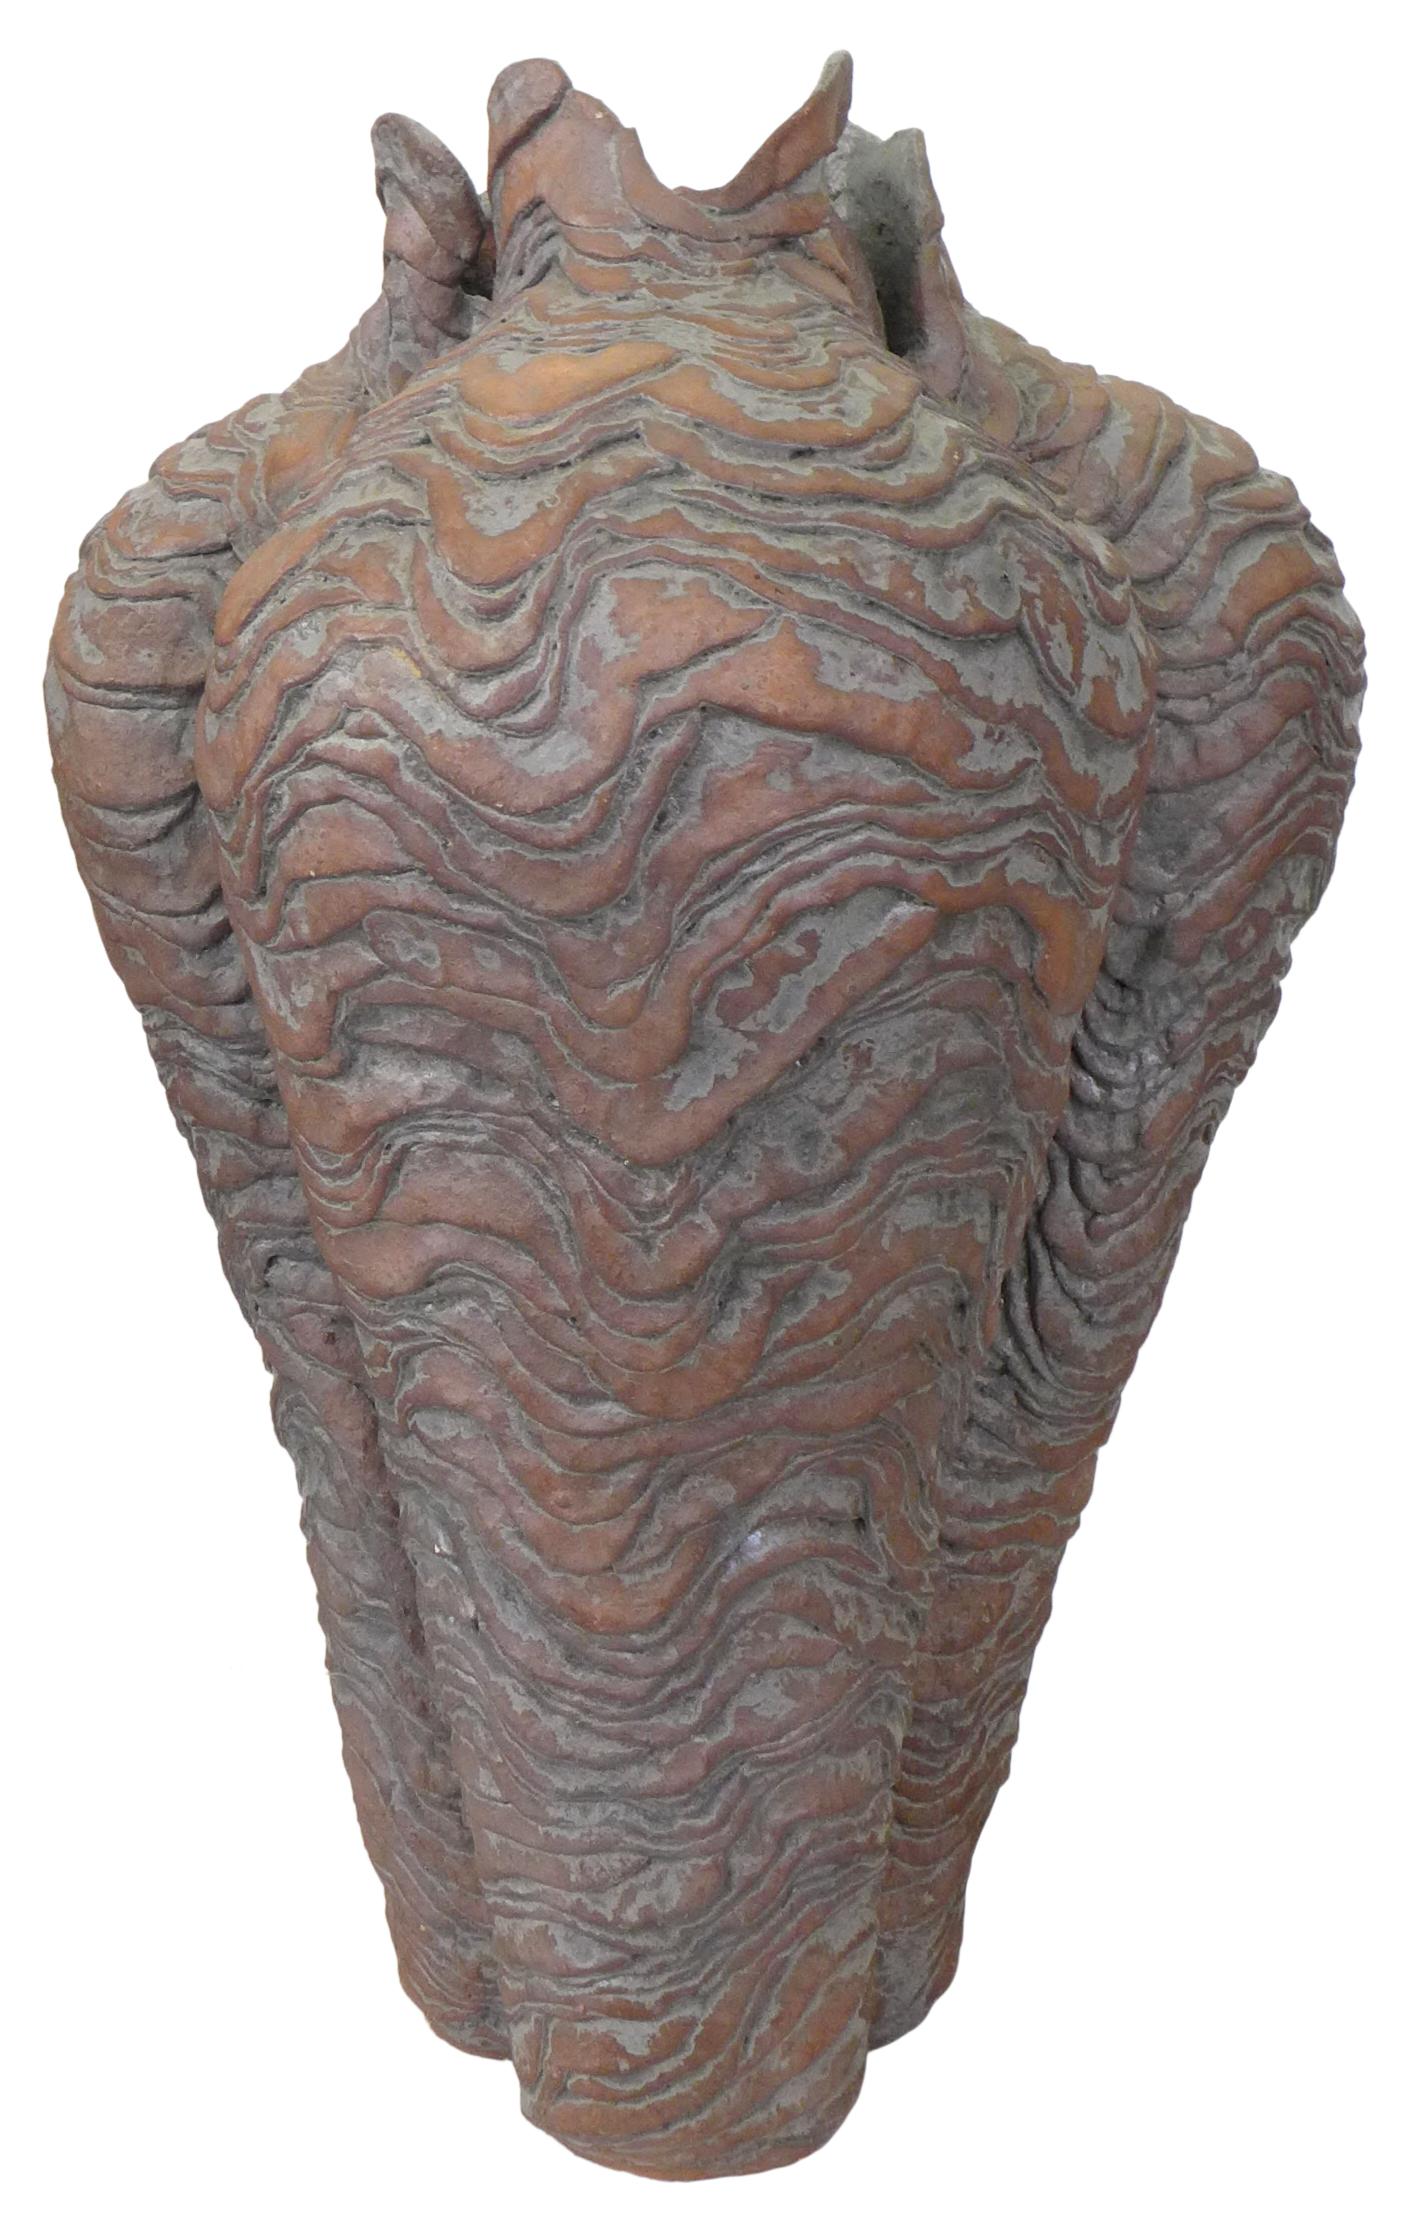 A monumental coil-built ceramic vase or vessel. A phyllomorphic, pod-like form with an undulating, approaching topographical, surface with a patinated bronze-like glaze. A sculptural, exceptional form skillfully executed. An outstanding example of